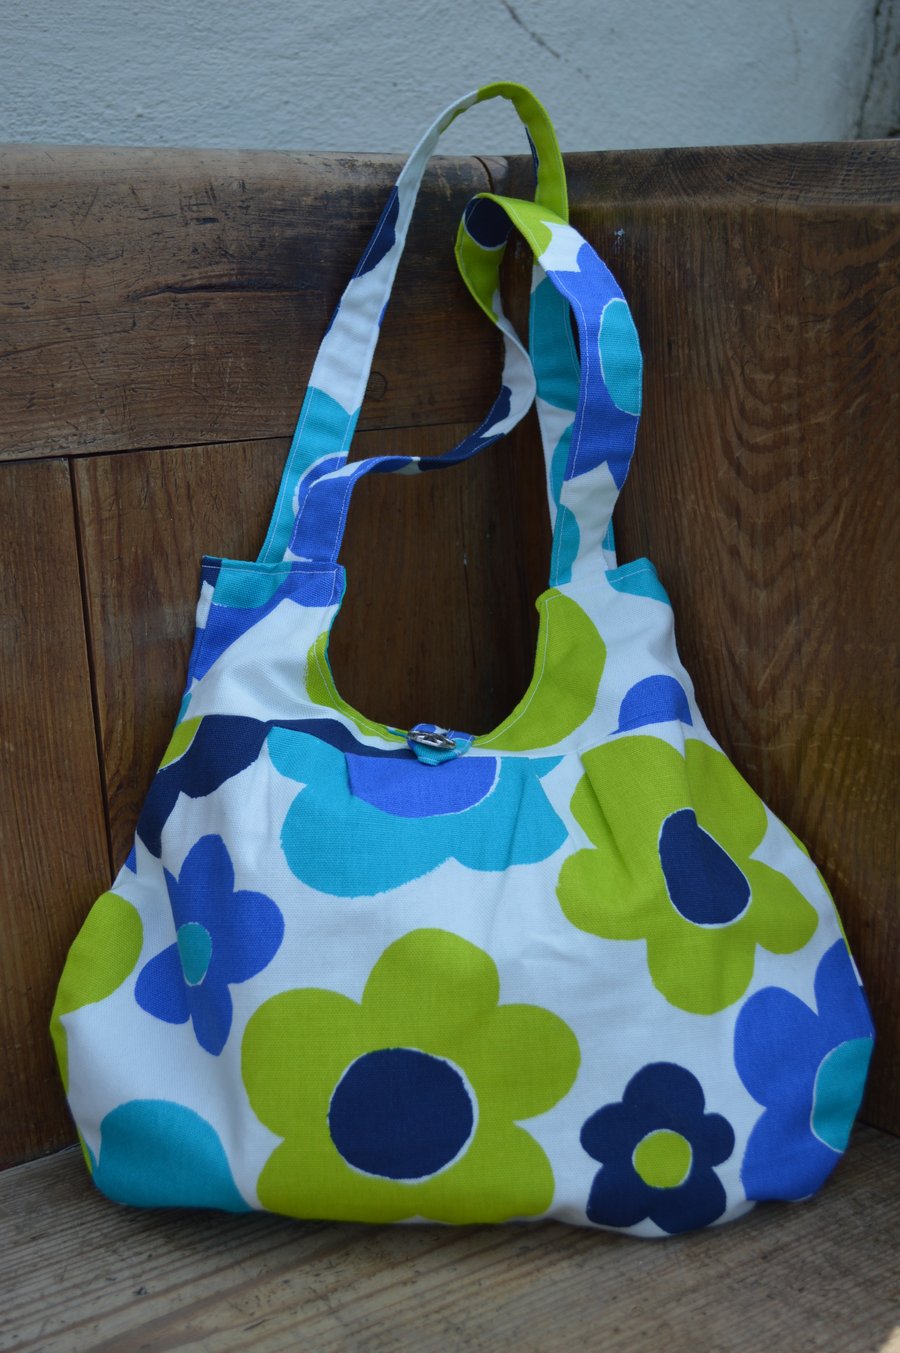 Blue and White lined bag